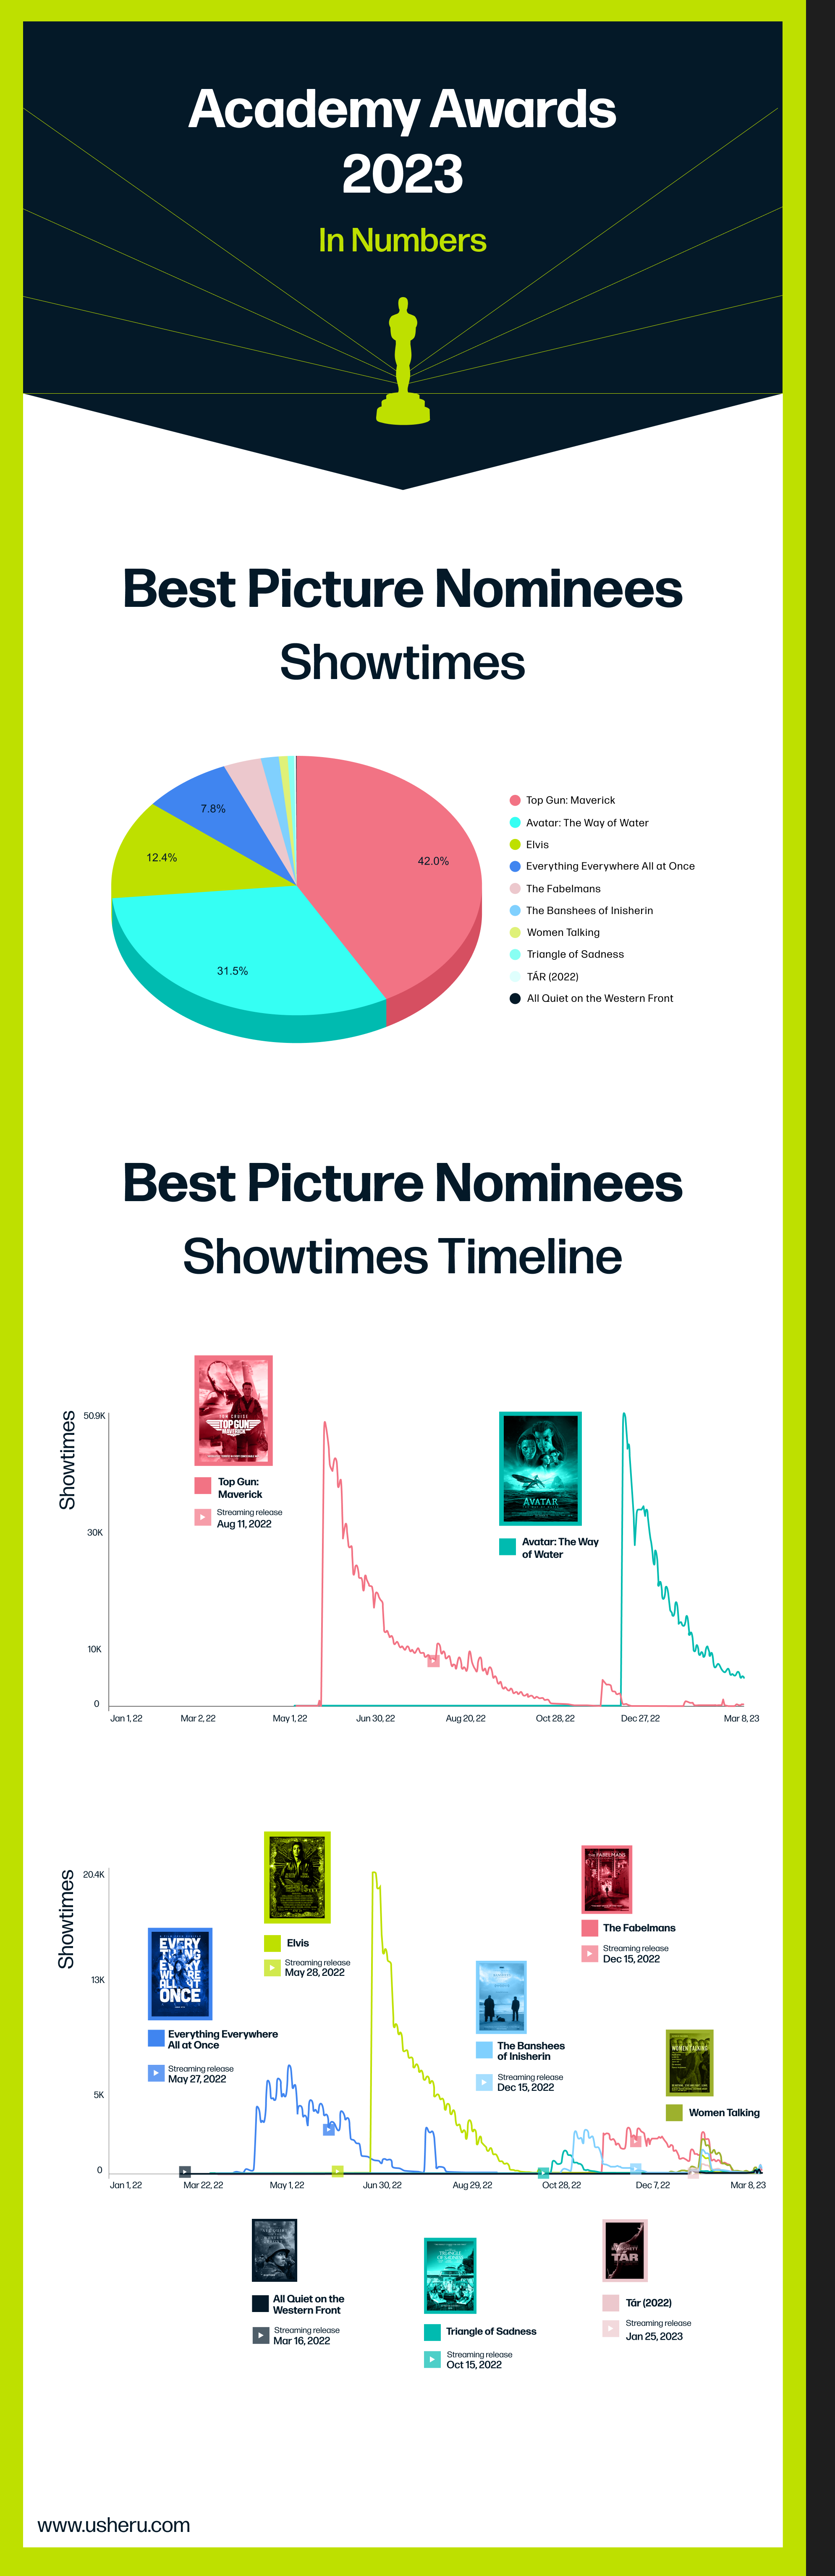 Infographic showing various showtimes data concerning the academy awards nominees for 2023.